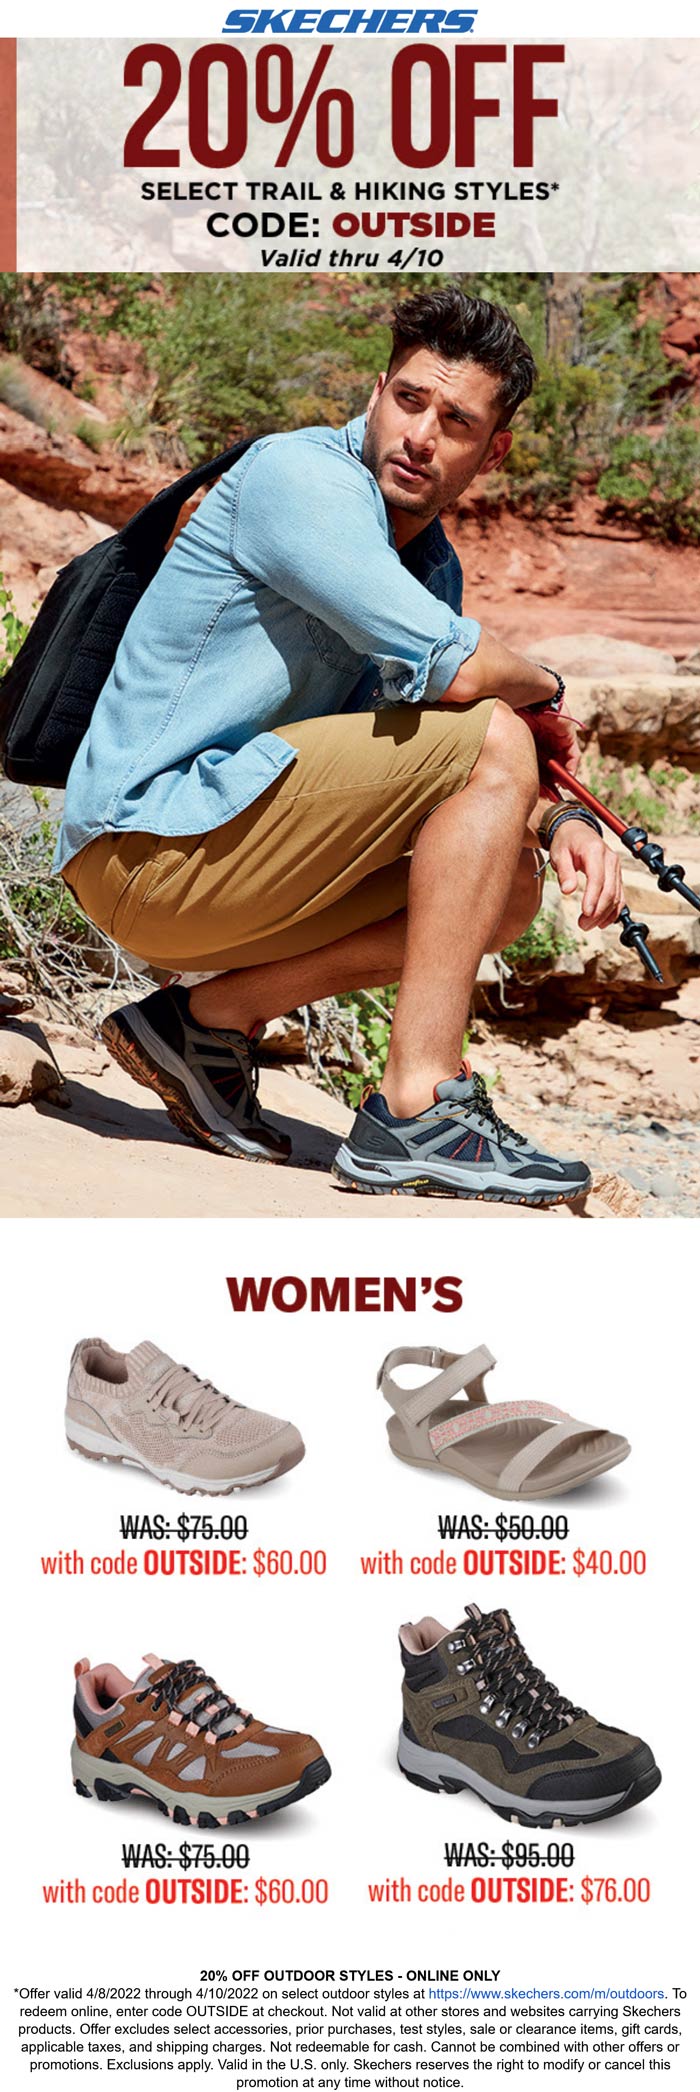 Skechers stores Coupon  20% off outdoor styles today online at Skechers shoes via promo code OUTSIDE #skechers 